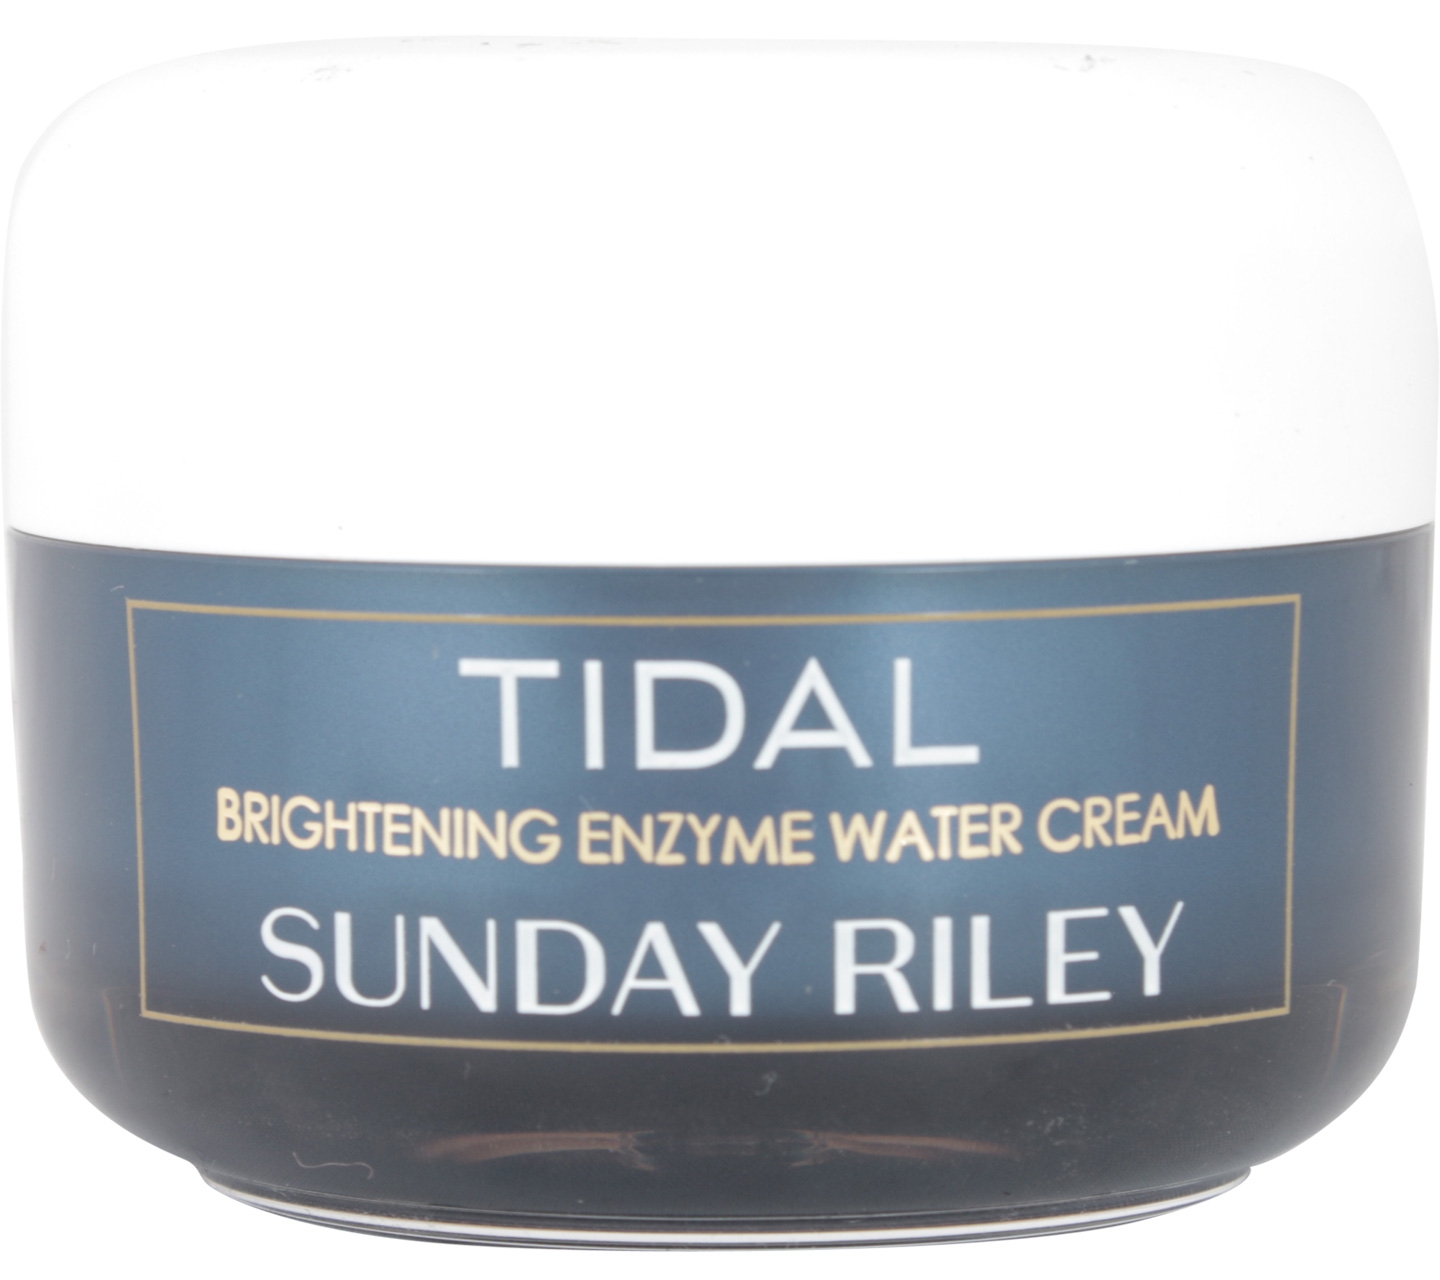 Sunday Riley Tidal Brightening Enzyme Water Cream Skin Care